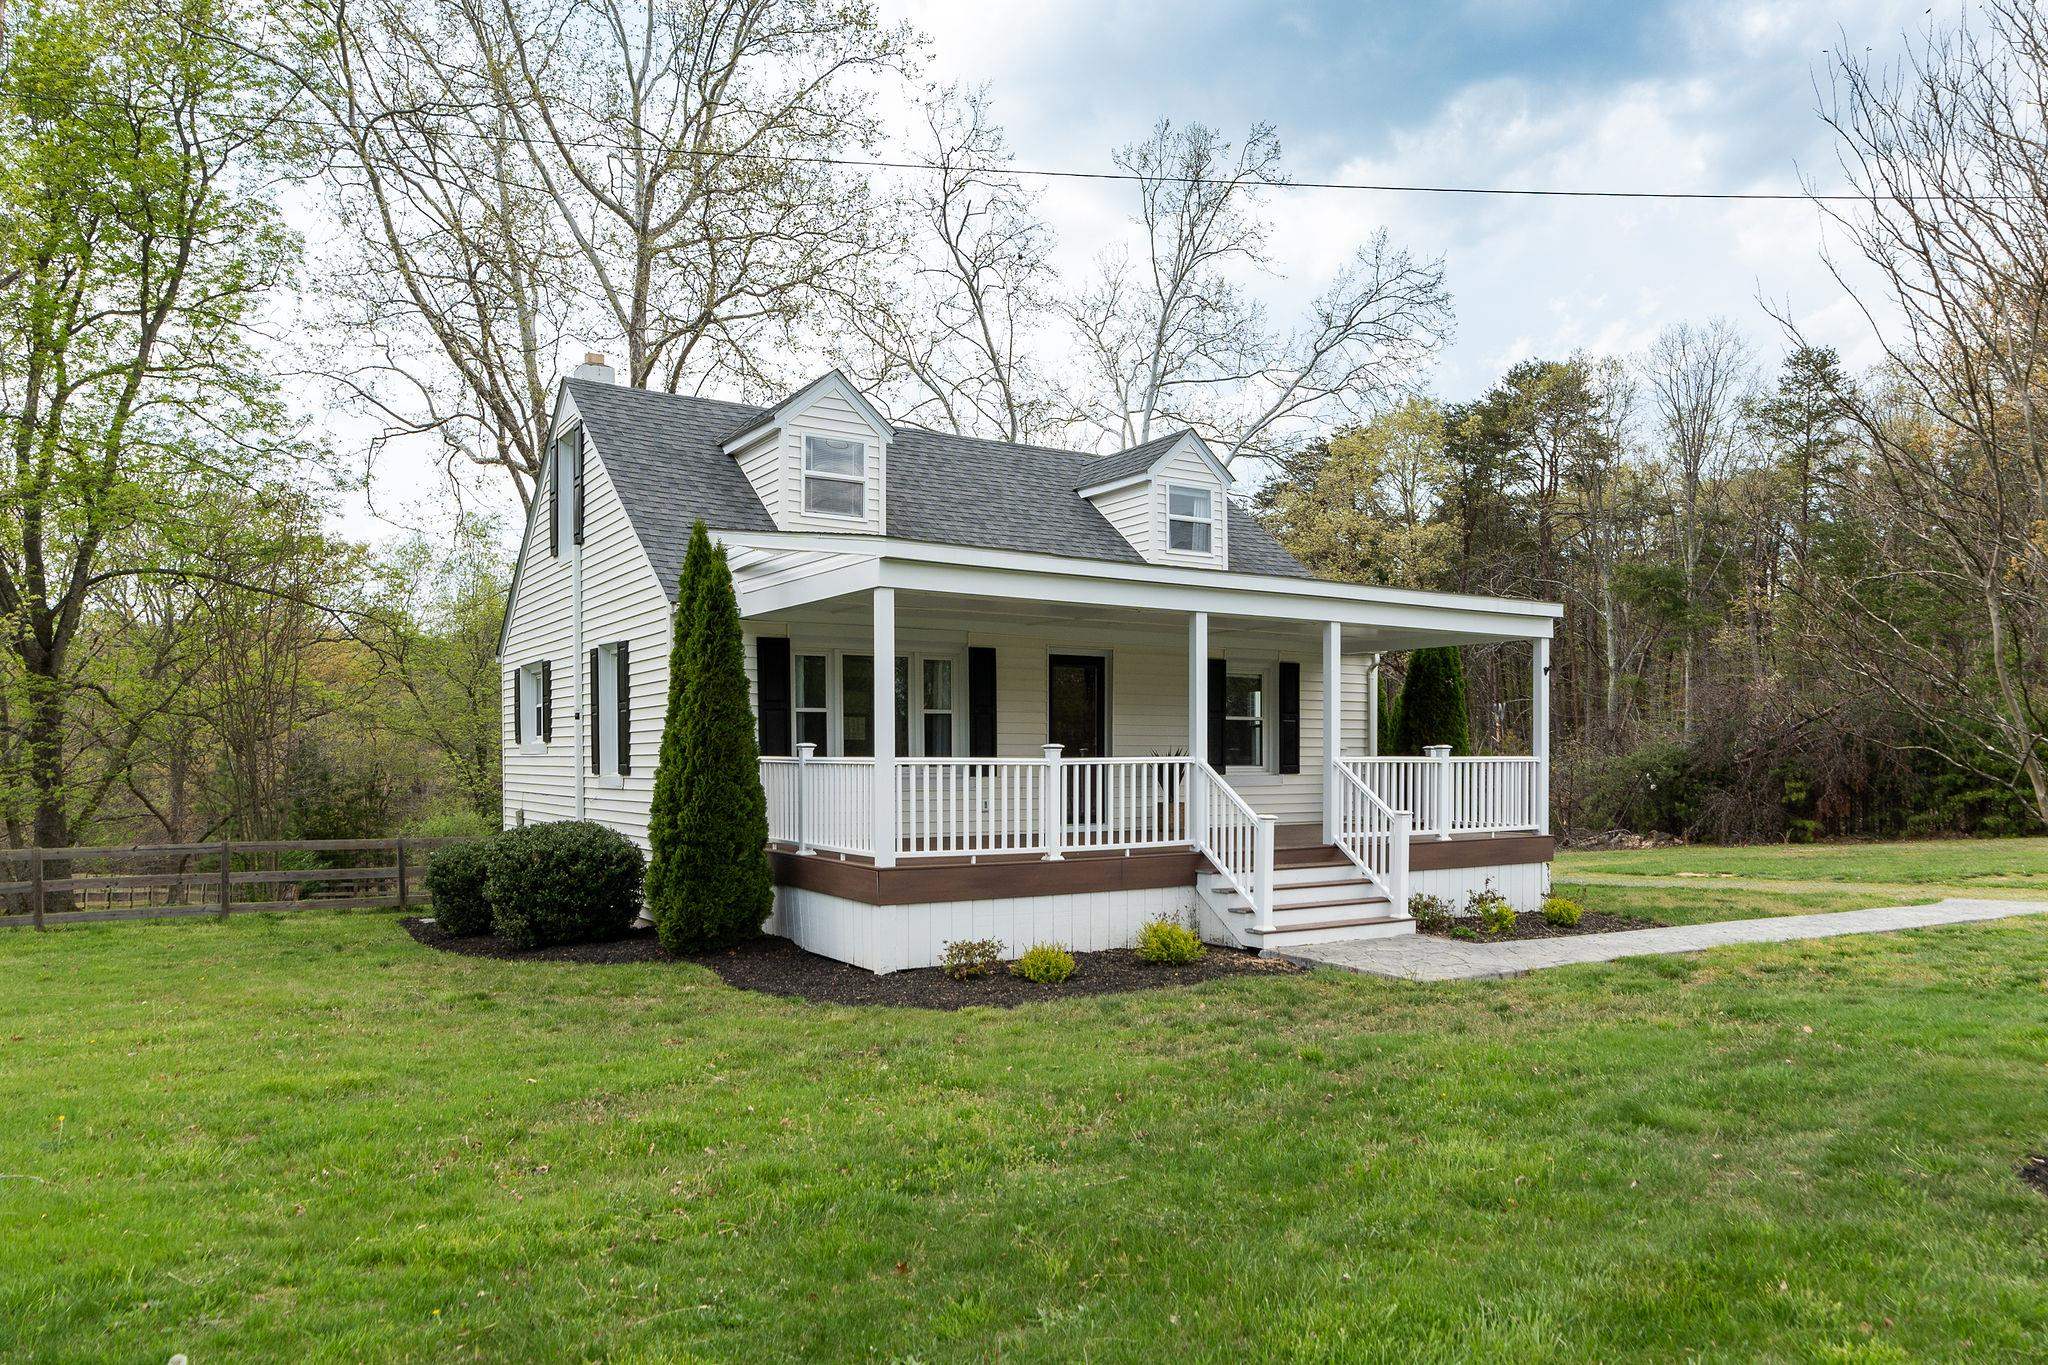 This home loves it's new front porch!